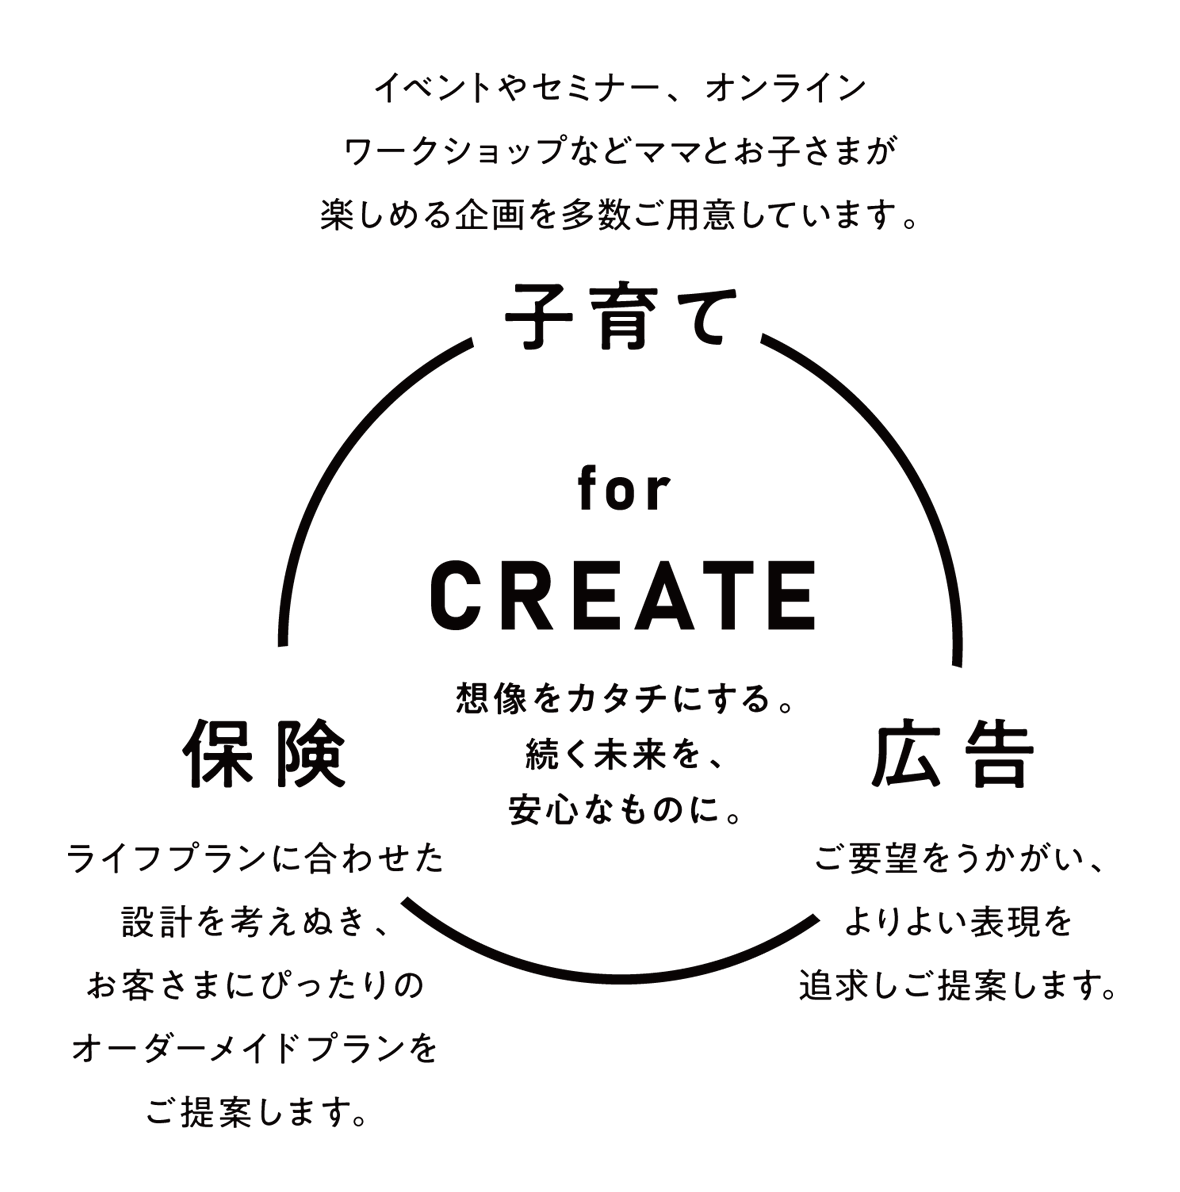 for CREATE